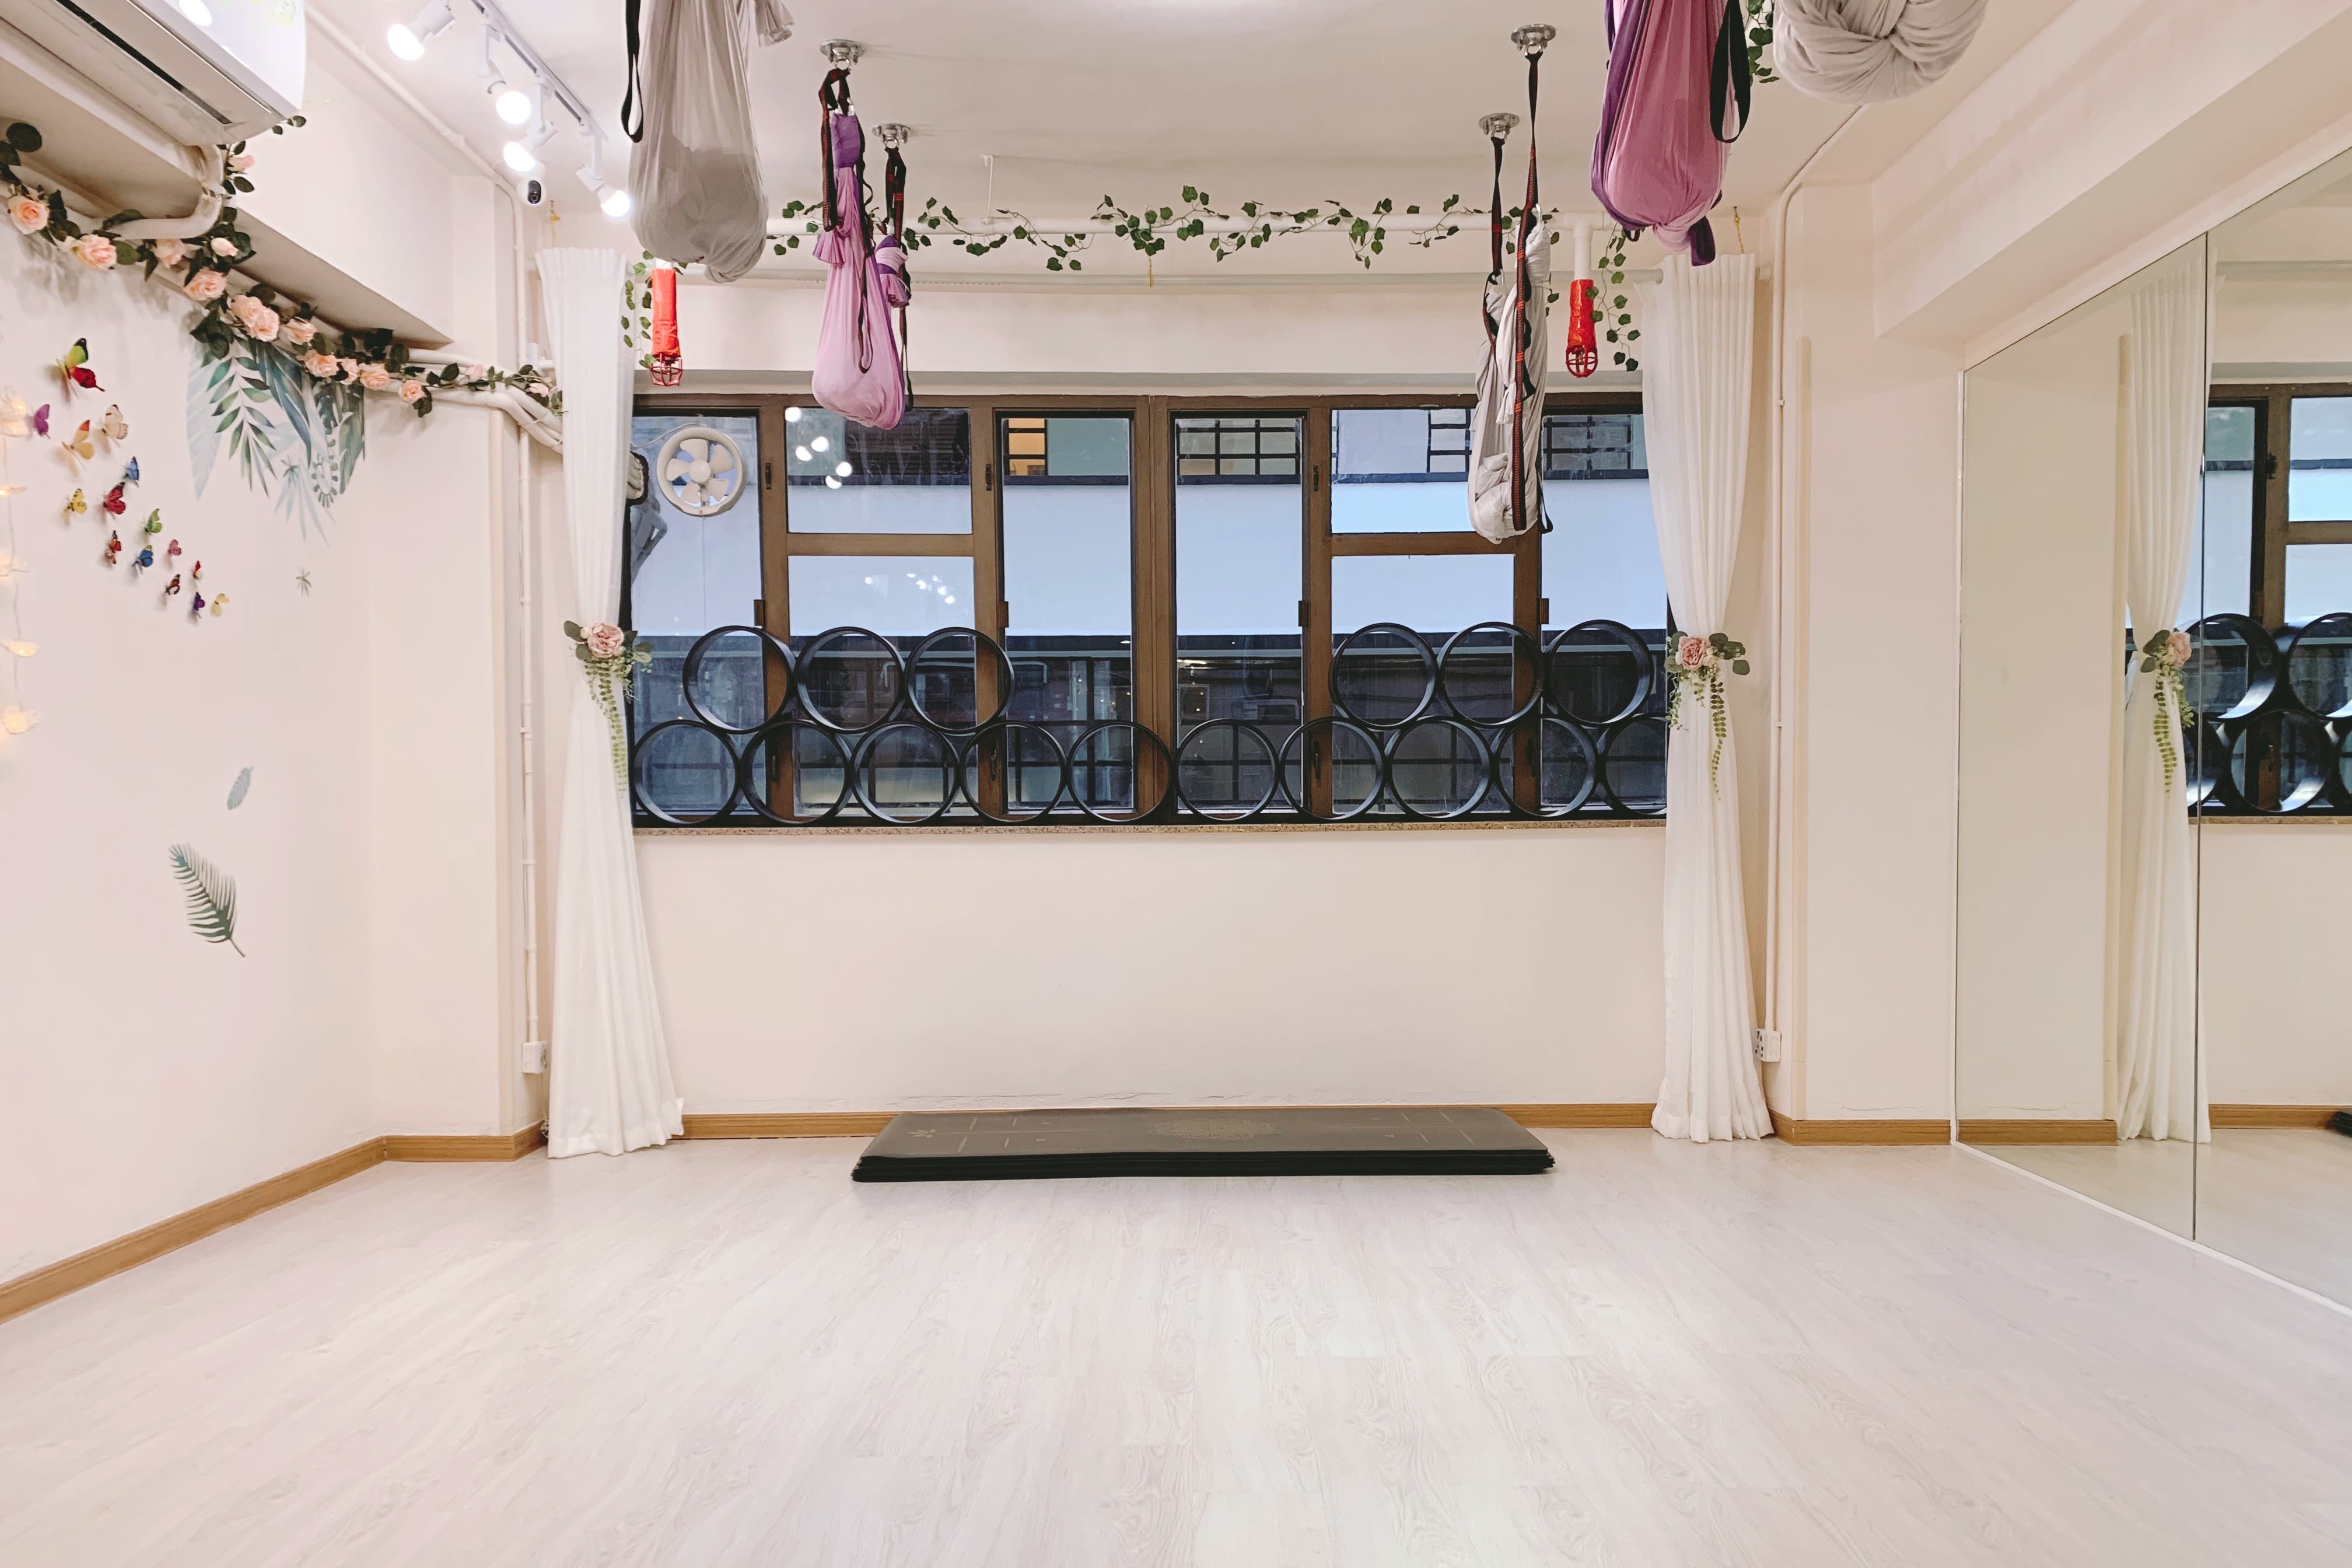 Daisy Yoga Read Reviews And Book Classes On Classpass